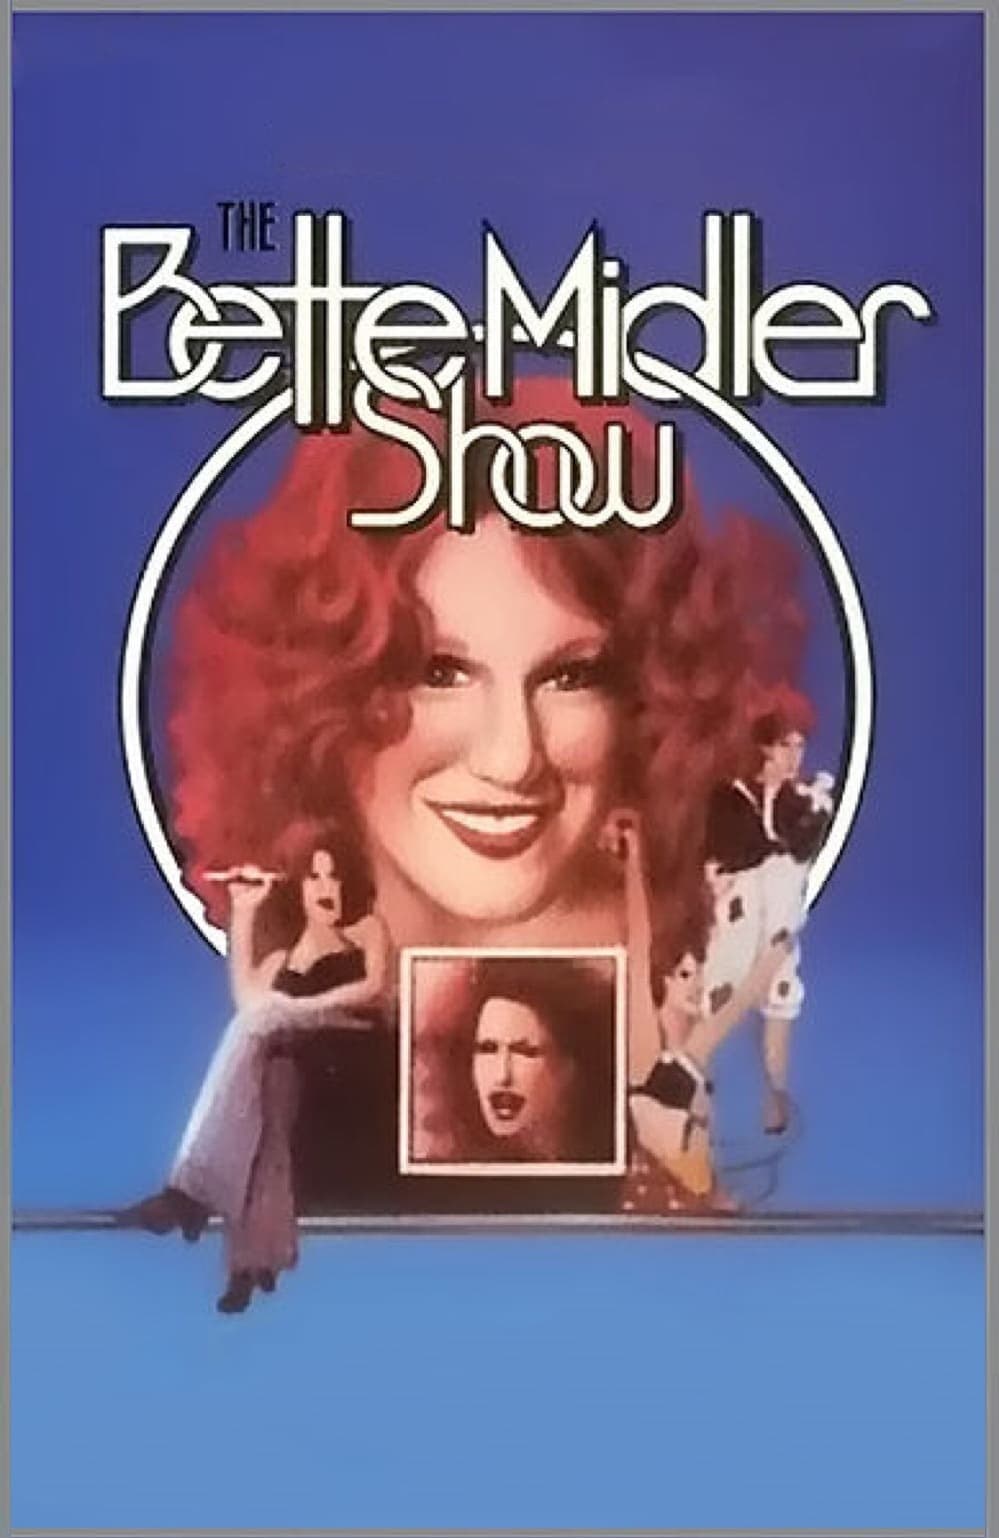 The Bette Midler Show (1976)